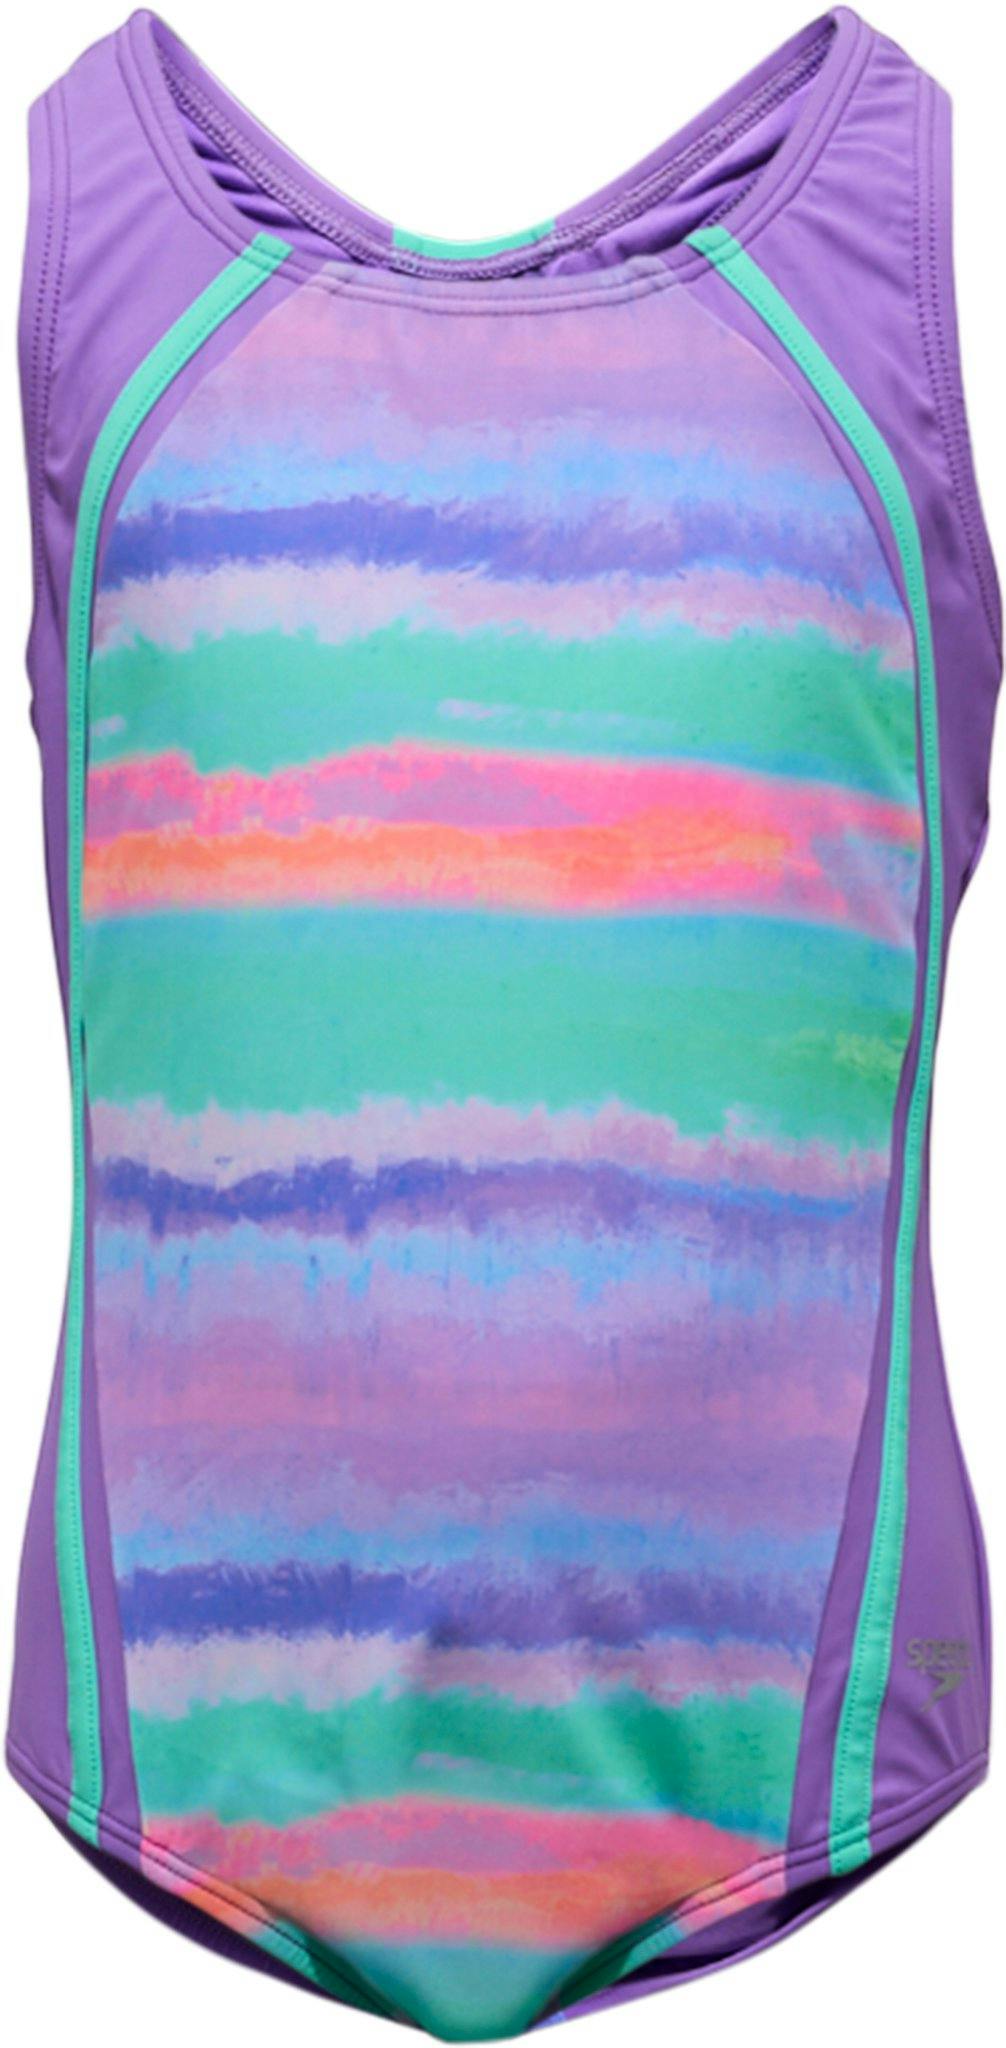 Product image for Printed SPORT Splice One Piece Swimsuit - Girl